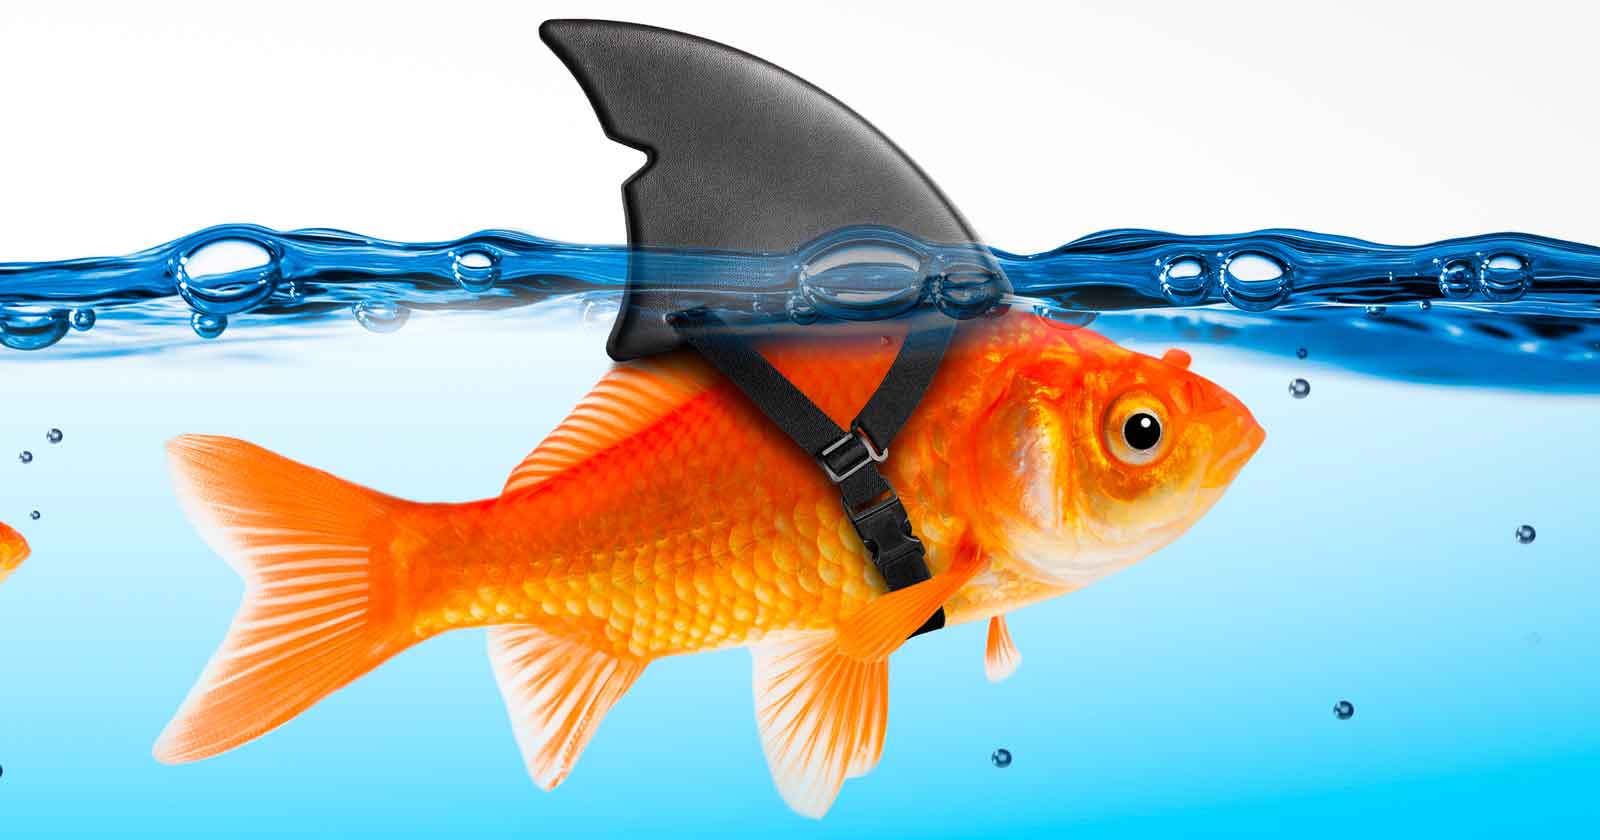 Image of a goldfish with a shark fin, symbolic of a bad fit or trying to be what you're not